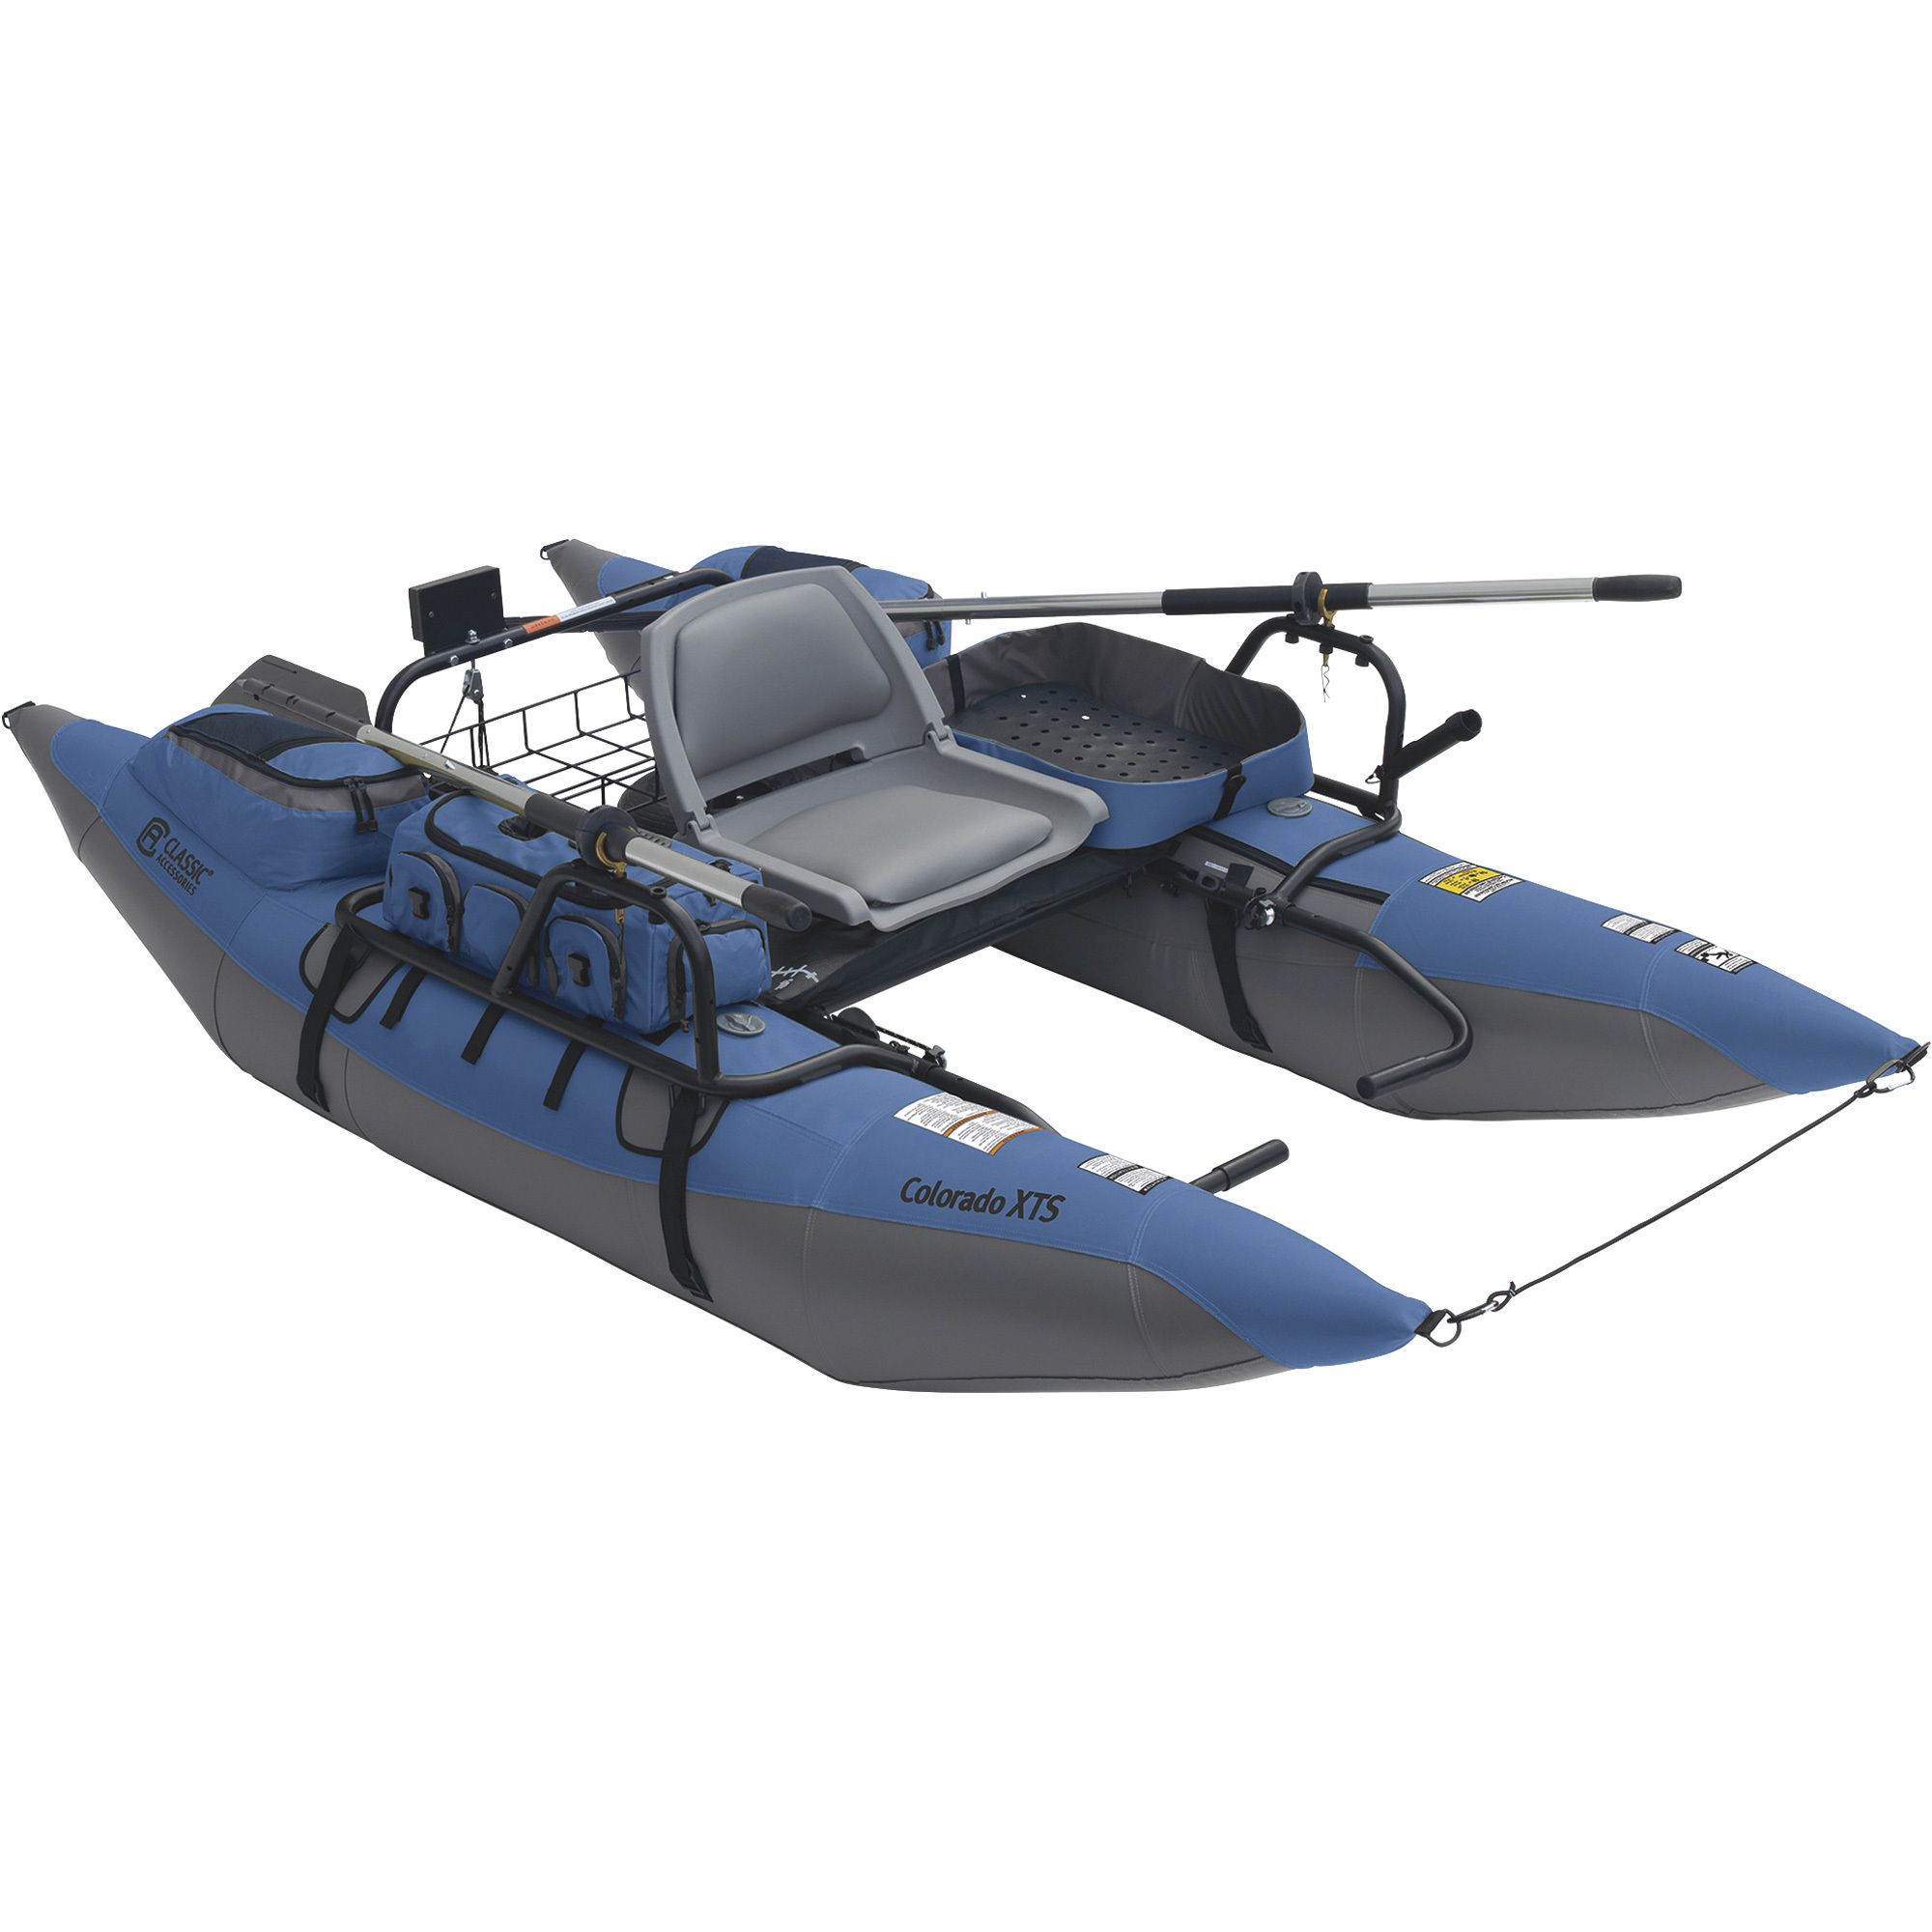 Classic Accessories Inflatable Colorado XTS Pontoon Boat, 108in.L